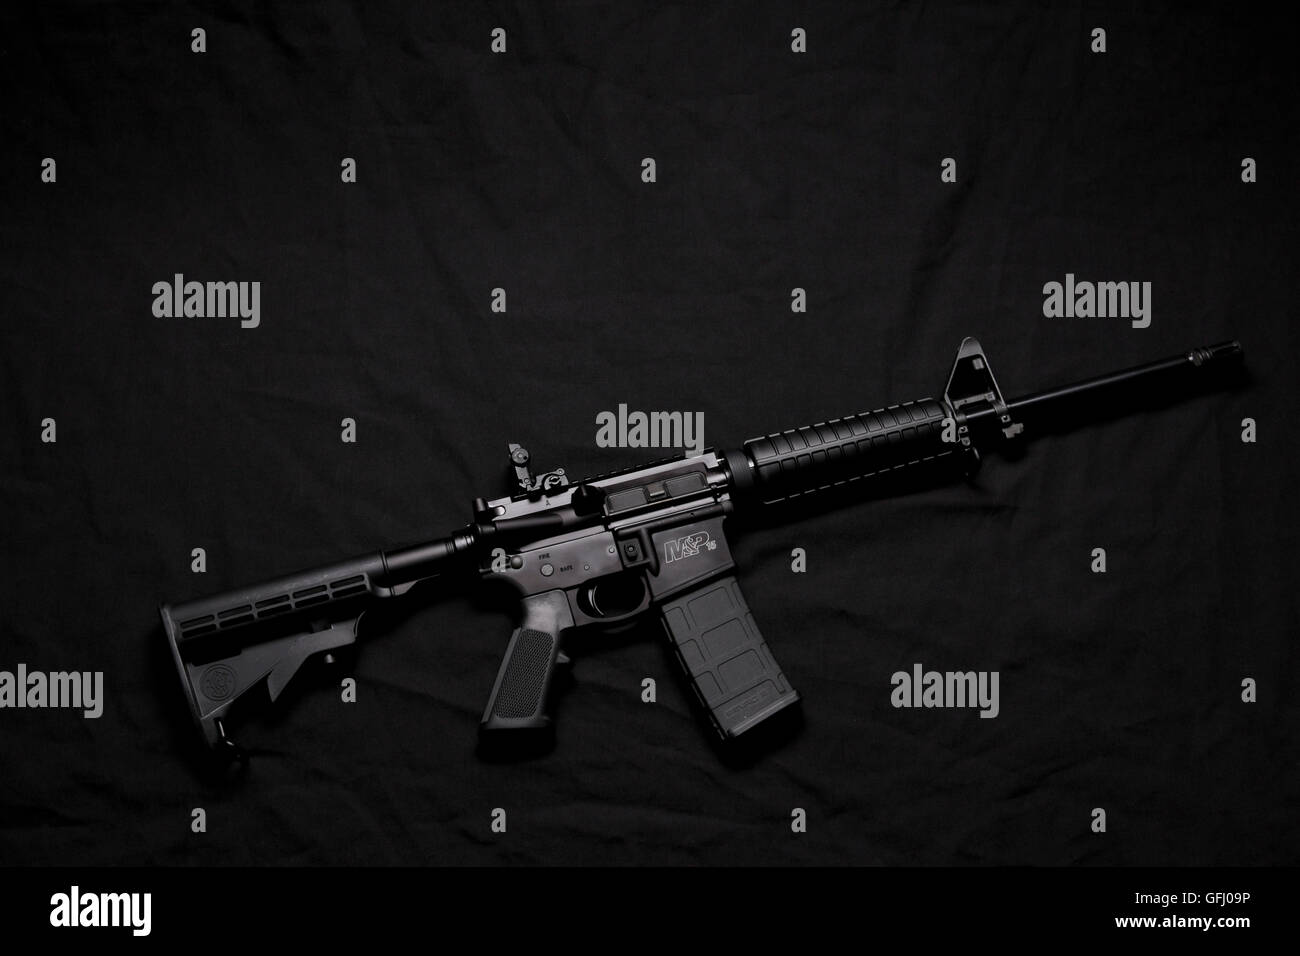 Smith & Wesson M&P 15 Sport II Configuration Stock Banque D'Images